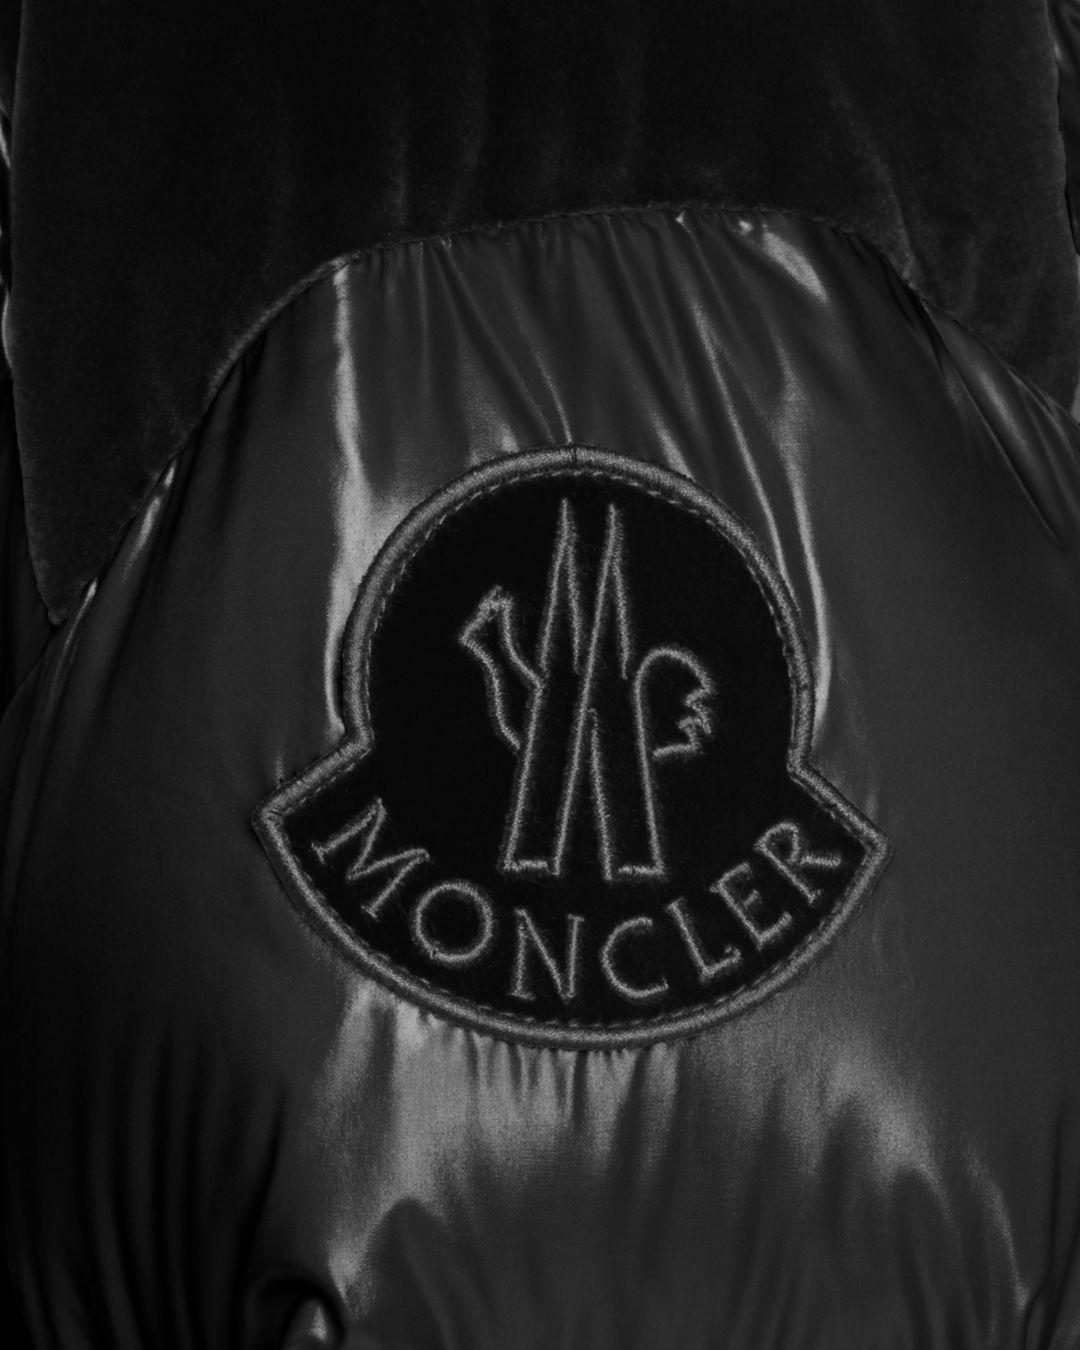 moncler chouette jacket black,OFF 55%,www.concordehotels.com.tr